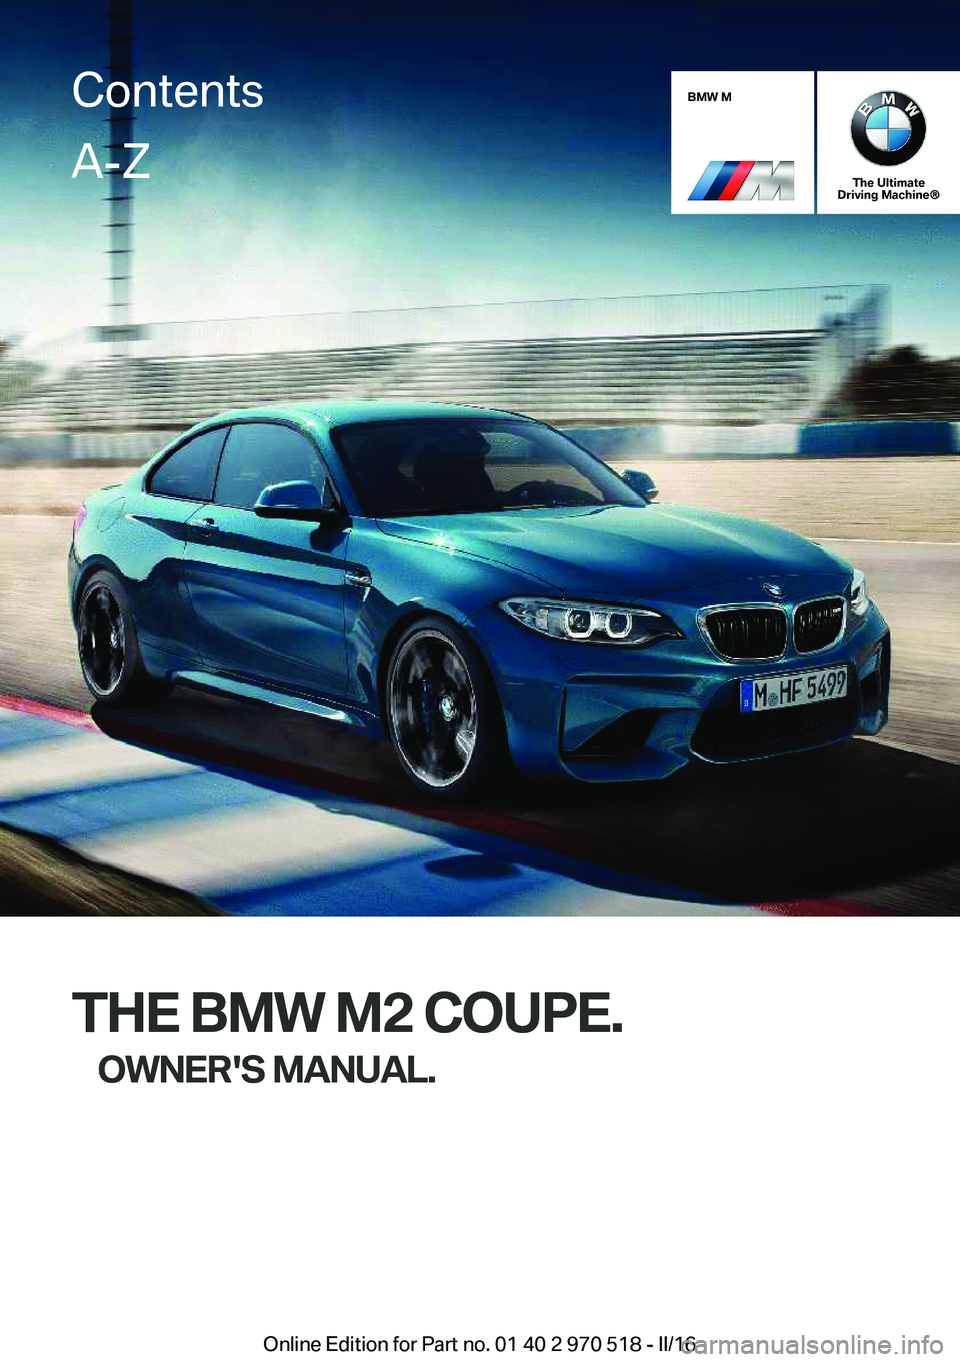 BMW M2 2016  Owners Manual BMW M
The Ultimate
Driving Machine®
THE BMW M2 COUPE.
OWNER'S MANUAL.
ContentsA-Z
Online Edition for Part no. 01 40 2 970 518 - II/16   